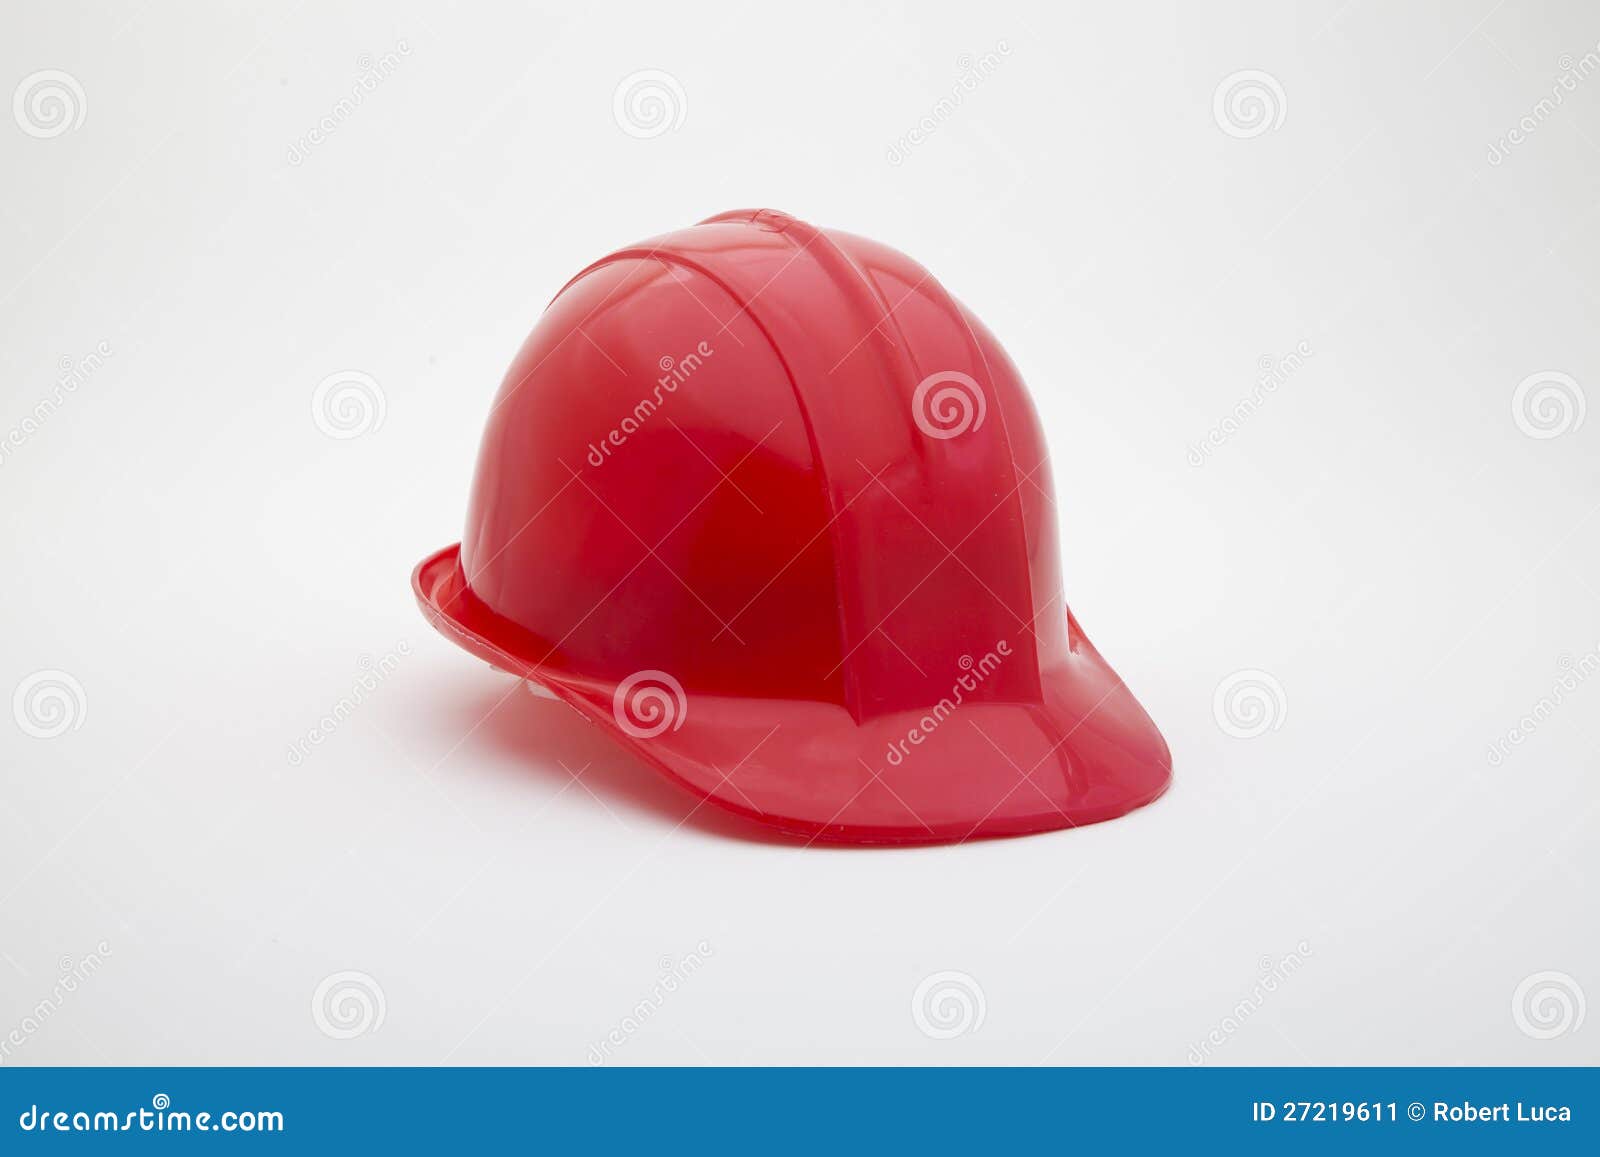 red helmet with clipping path